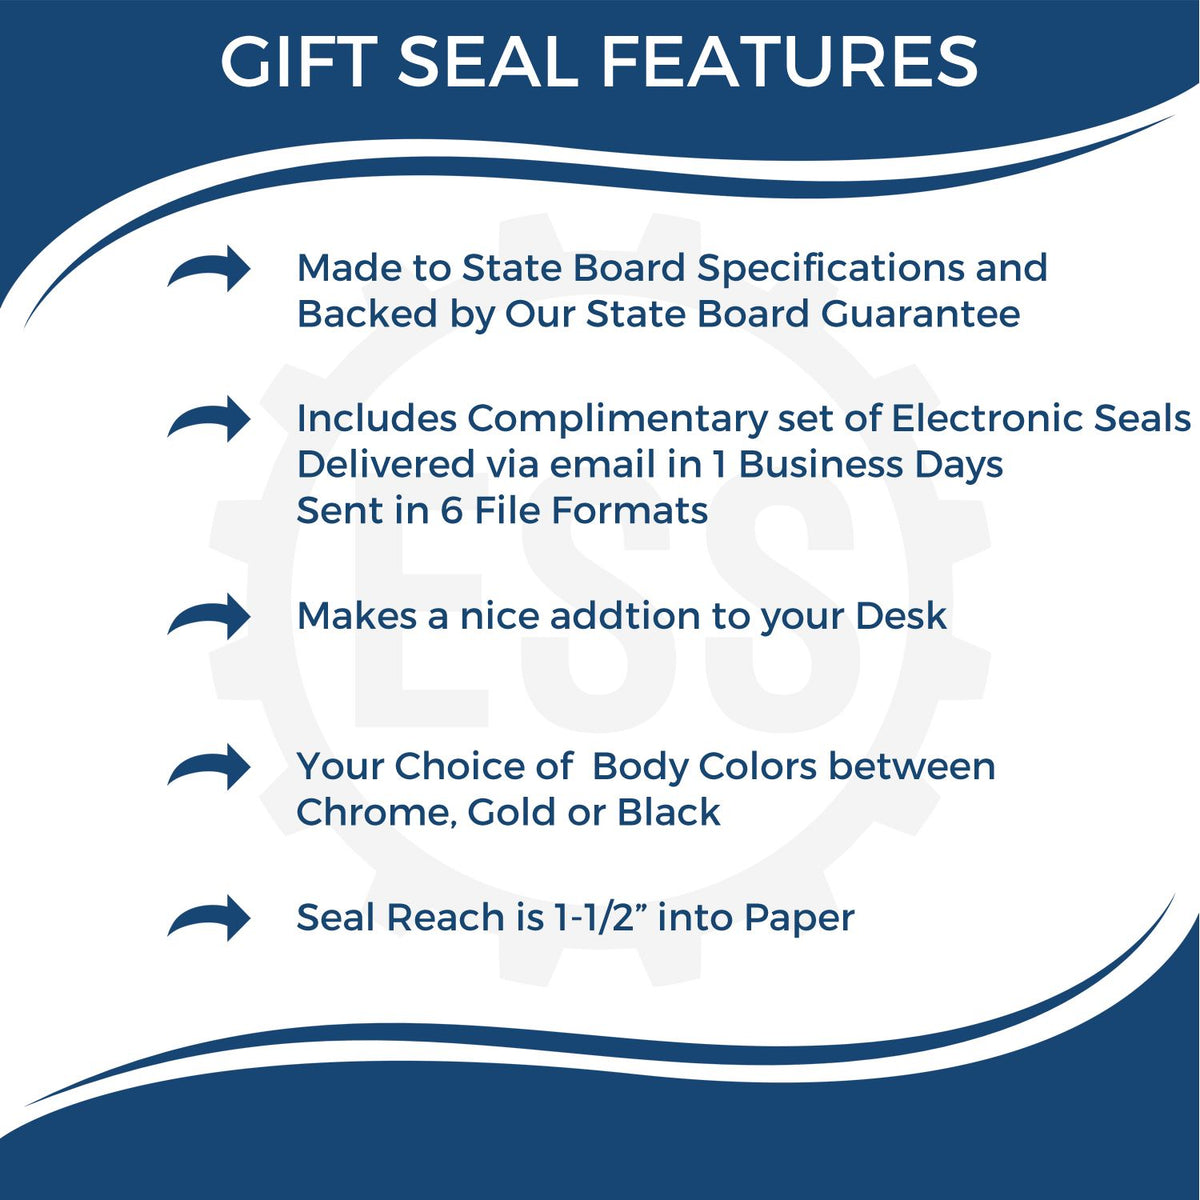 A picture of an infographic highlighting the selling points for the Gift Massachusetts Geologist Seal